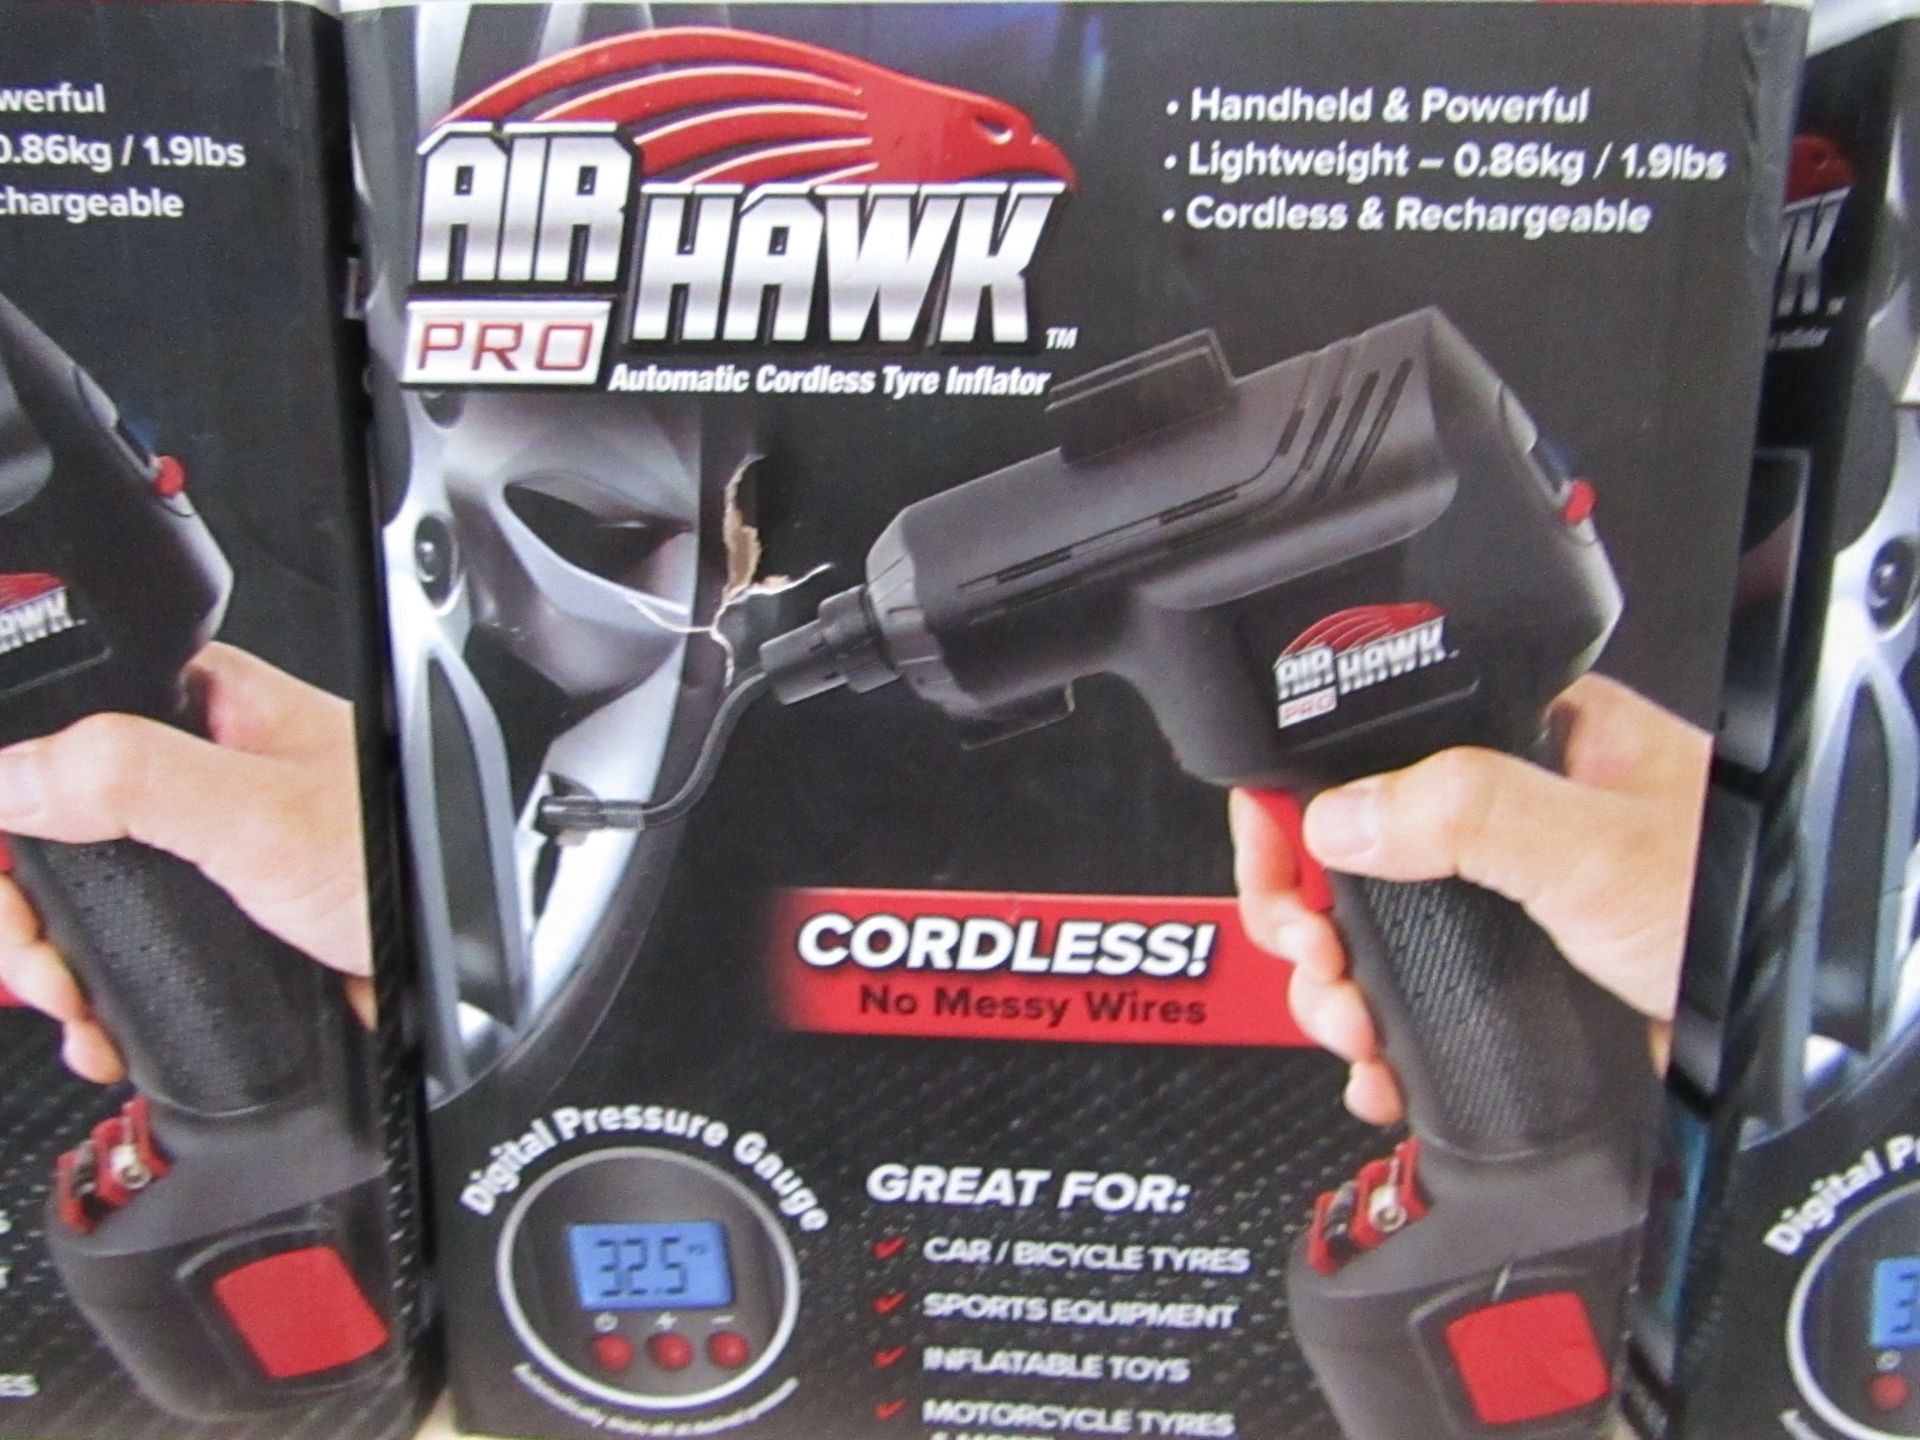 | 1x | Air Hawk Pro compressor | tested working and boxed | no online re-sale | Sku C5060191466837 |